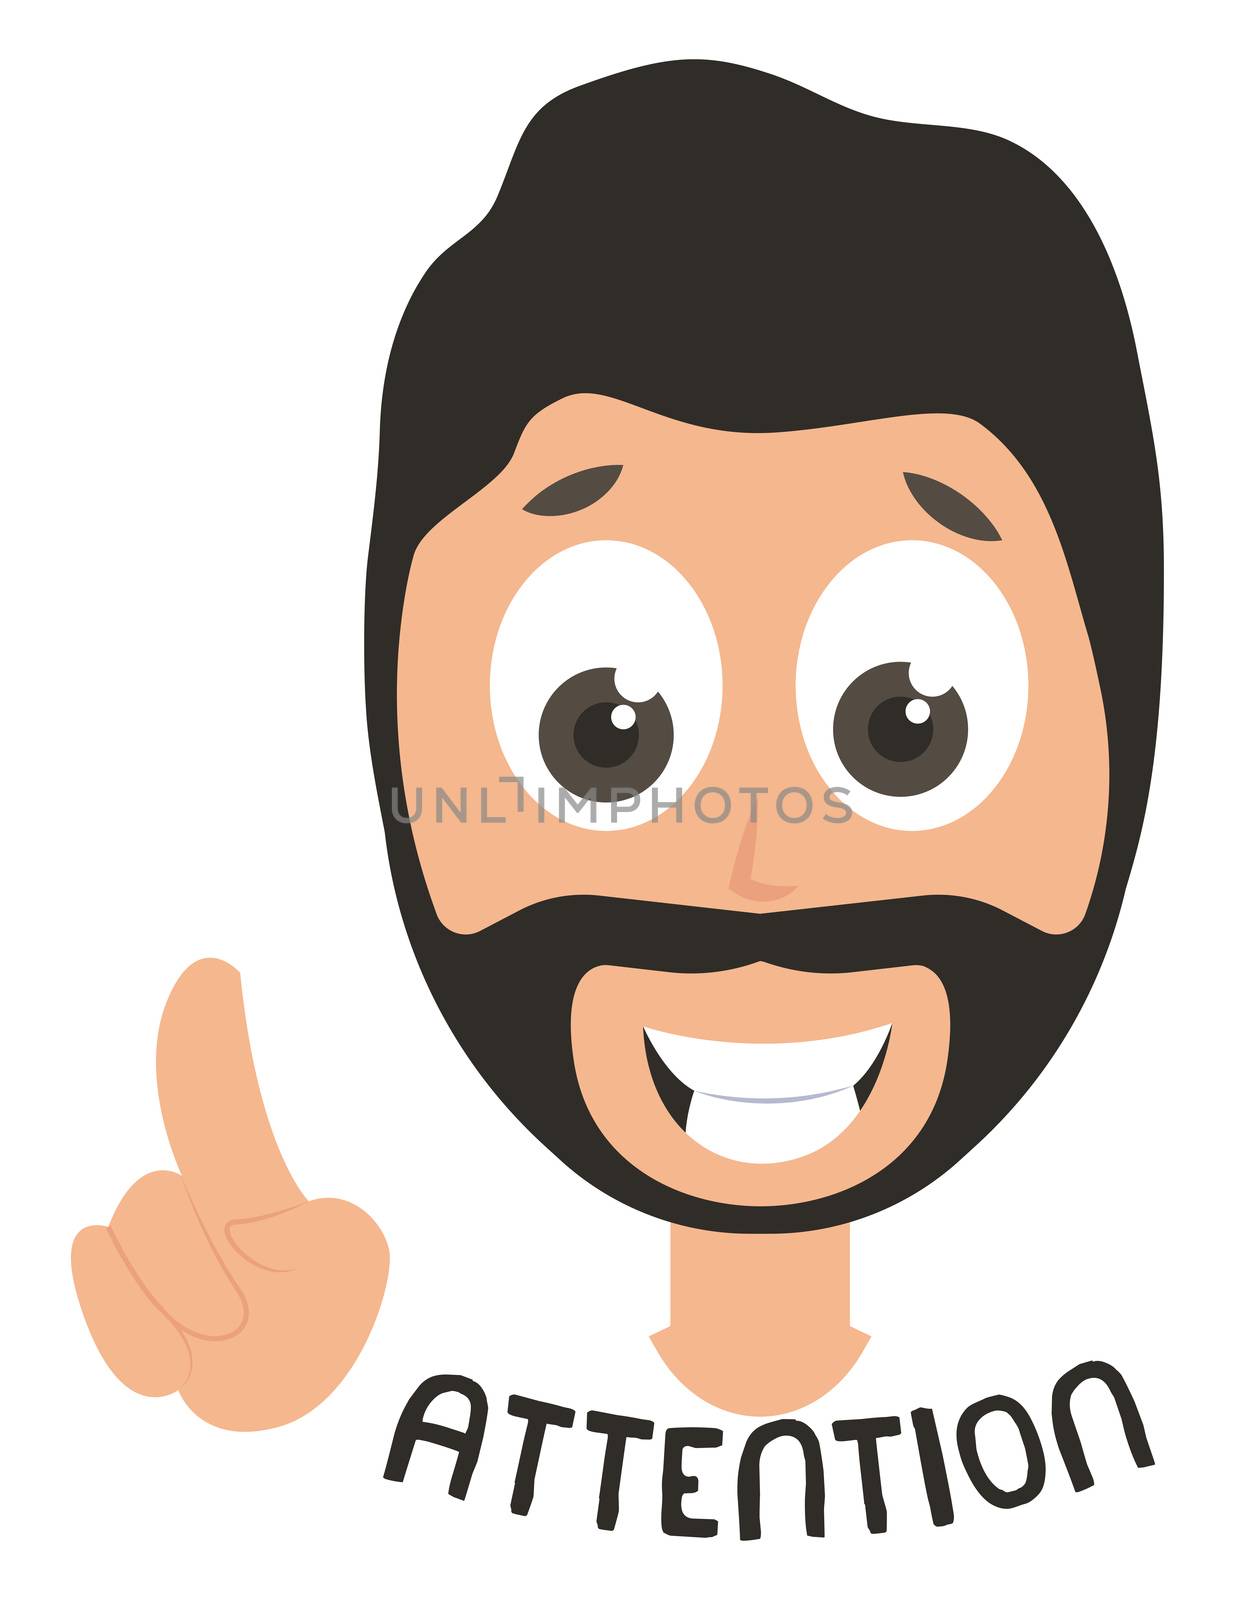 Man gives attention, illustration, vector on white background